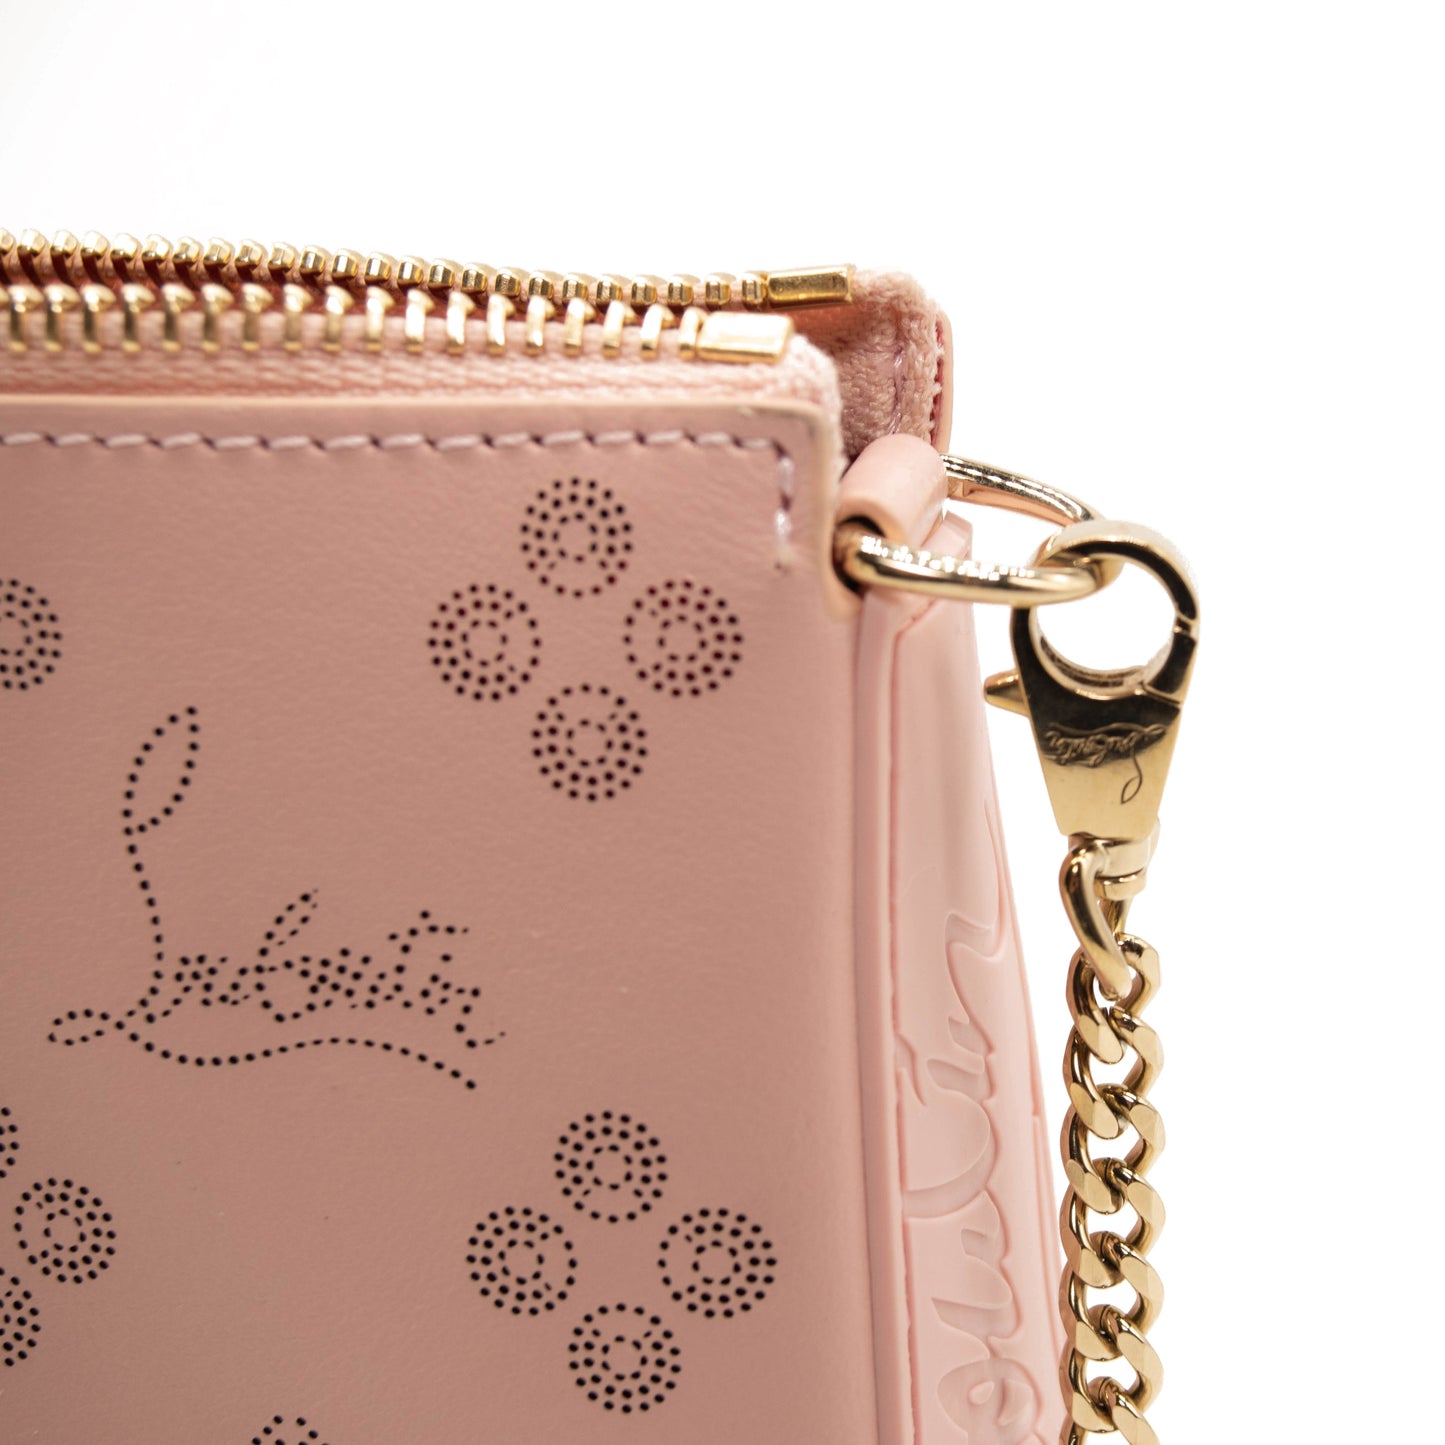 Christian Louboutin Loubila Loubinthesky Laser Perforated Leather Pouch Pink